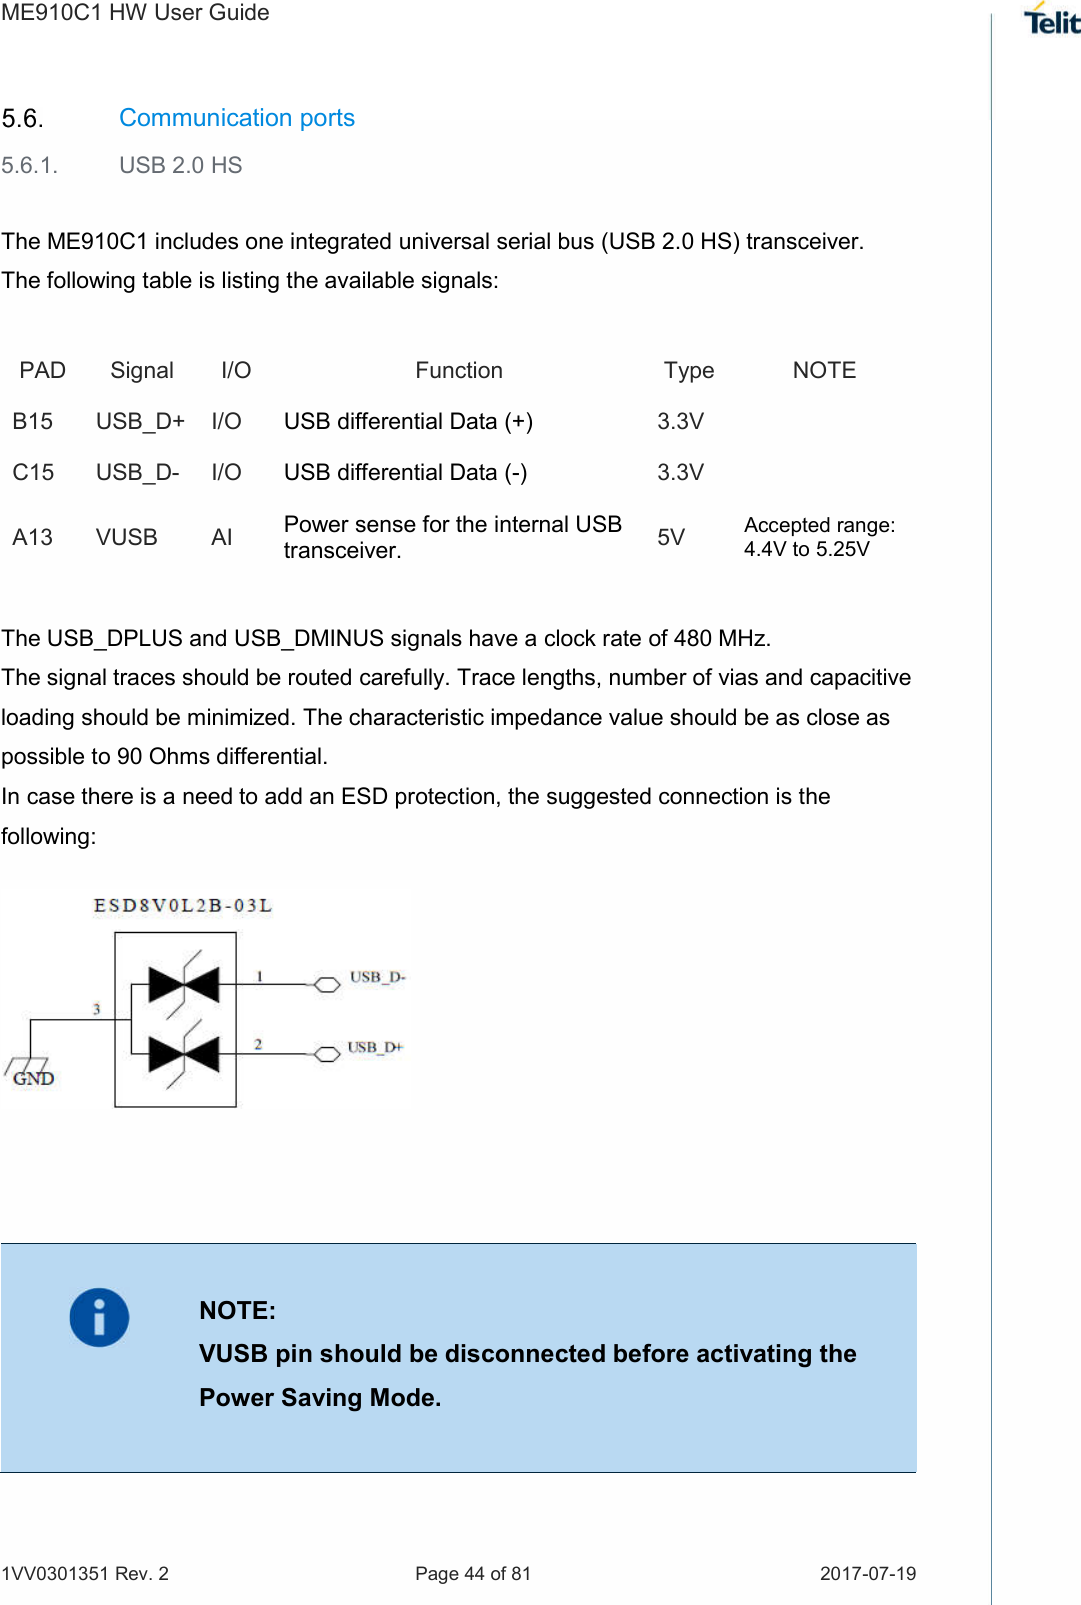 ME910C1 HW User Guide 1VV0301351 Rev. 2  Page 44 of 81  2017-07-19   Communication ports 5.6.1.  USB 2.0 HS  The ME910C1 includes one integrated universal serial bus (USB 2.0 HS) transceiver. The following table is listing the available signals: PAD  Signal  I/O  Function  Type  NOTE B15 USB_D+  I/O  USB differential Data (+)  3.3V   C15 USB_D-  I/O  USB differential Data (-)  3.3V   A13 VUSB  AI  Power sense for the internal USB transceiver. 5V  Accepted range: 4.4V to 5.25V  The USB_DPLUS and USB_DMINUS signals have a clock rate of 480 MHz.  The signal traces should be routed carefully. Trace lengths, number of vias and capacitive loading should be minimized. The characteristic impedance value should be as close as possible to 90 Ohms differential.  In case there is a need to add an ESD protection, the suggested connection is the following:                NOTE: VUSB pin should be disconnected before activating the Power Saving Mode.  